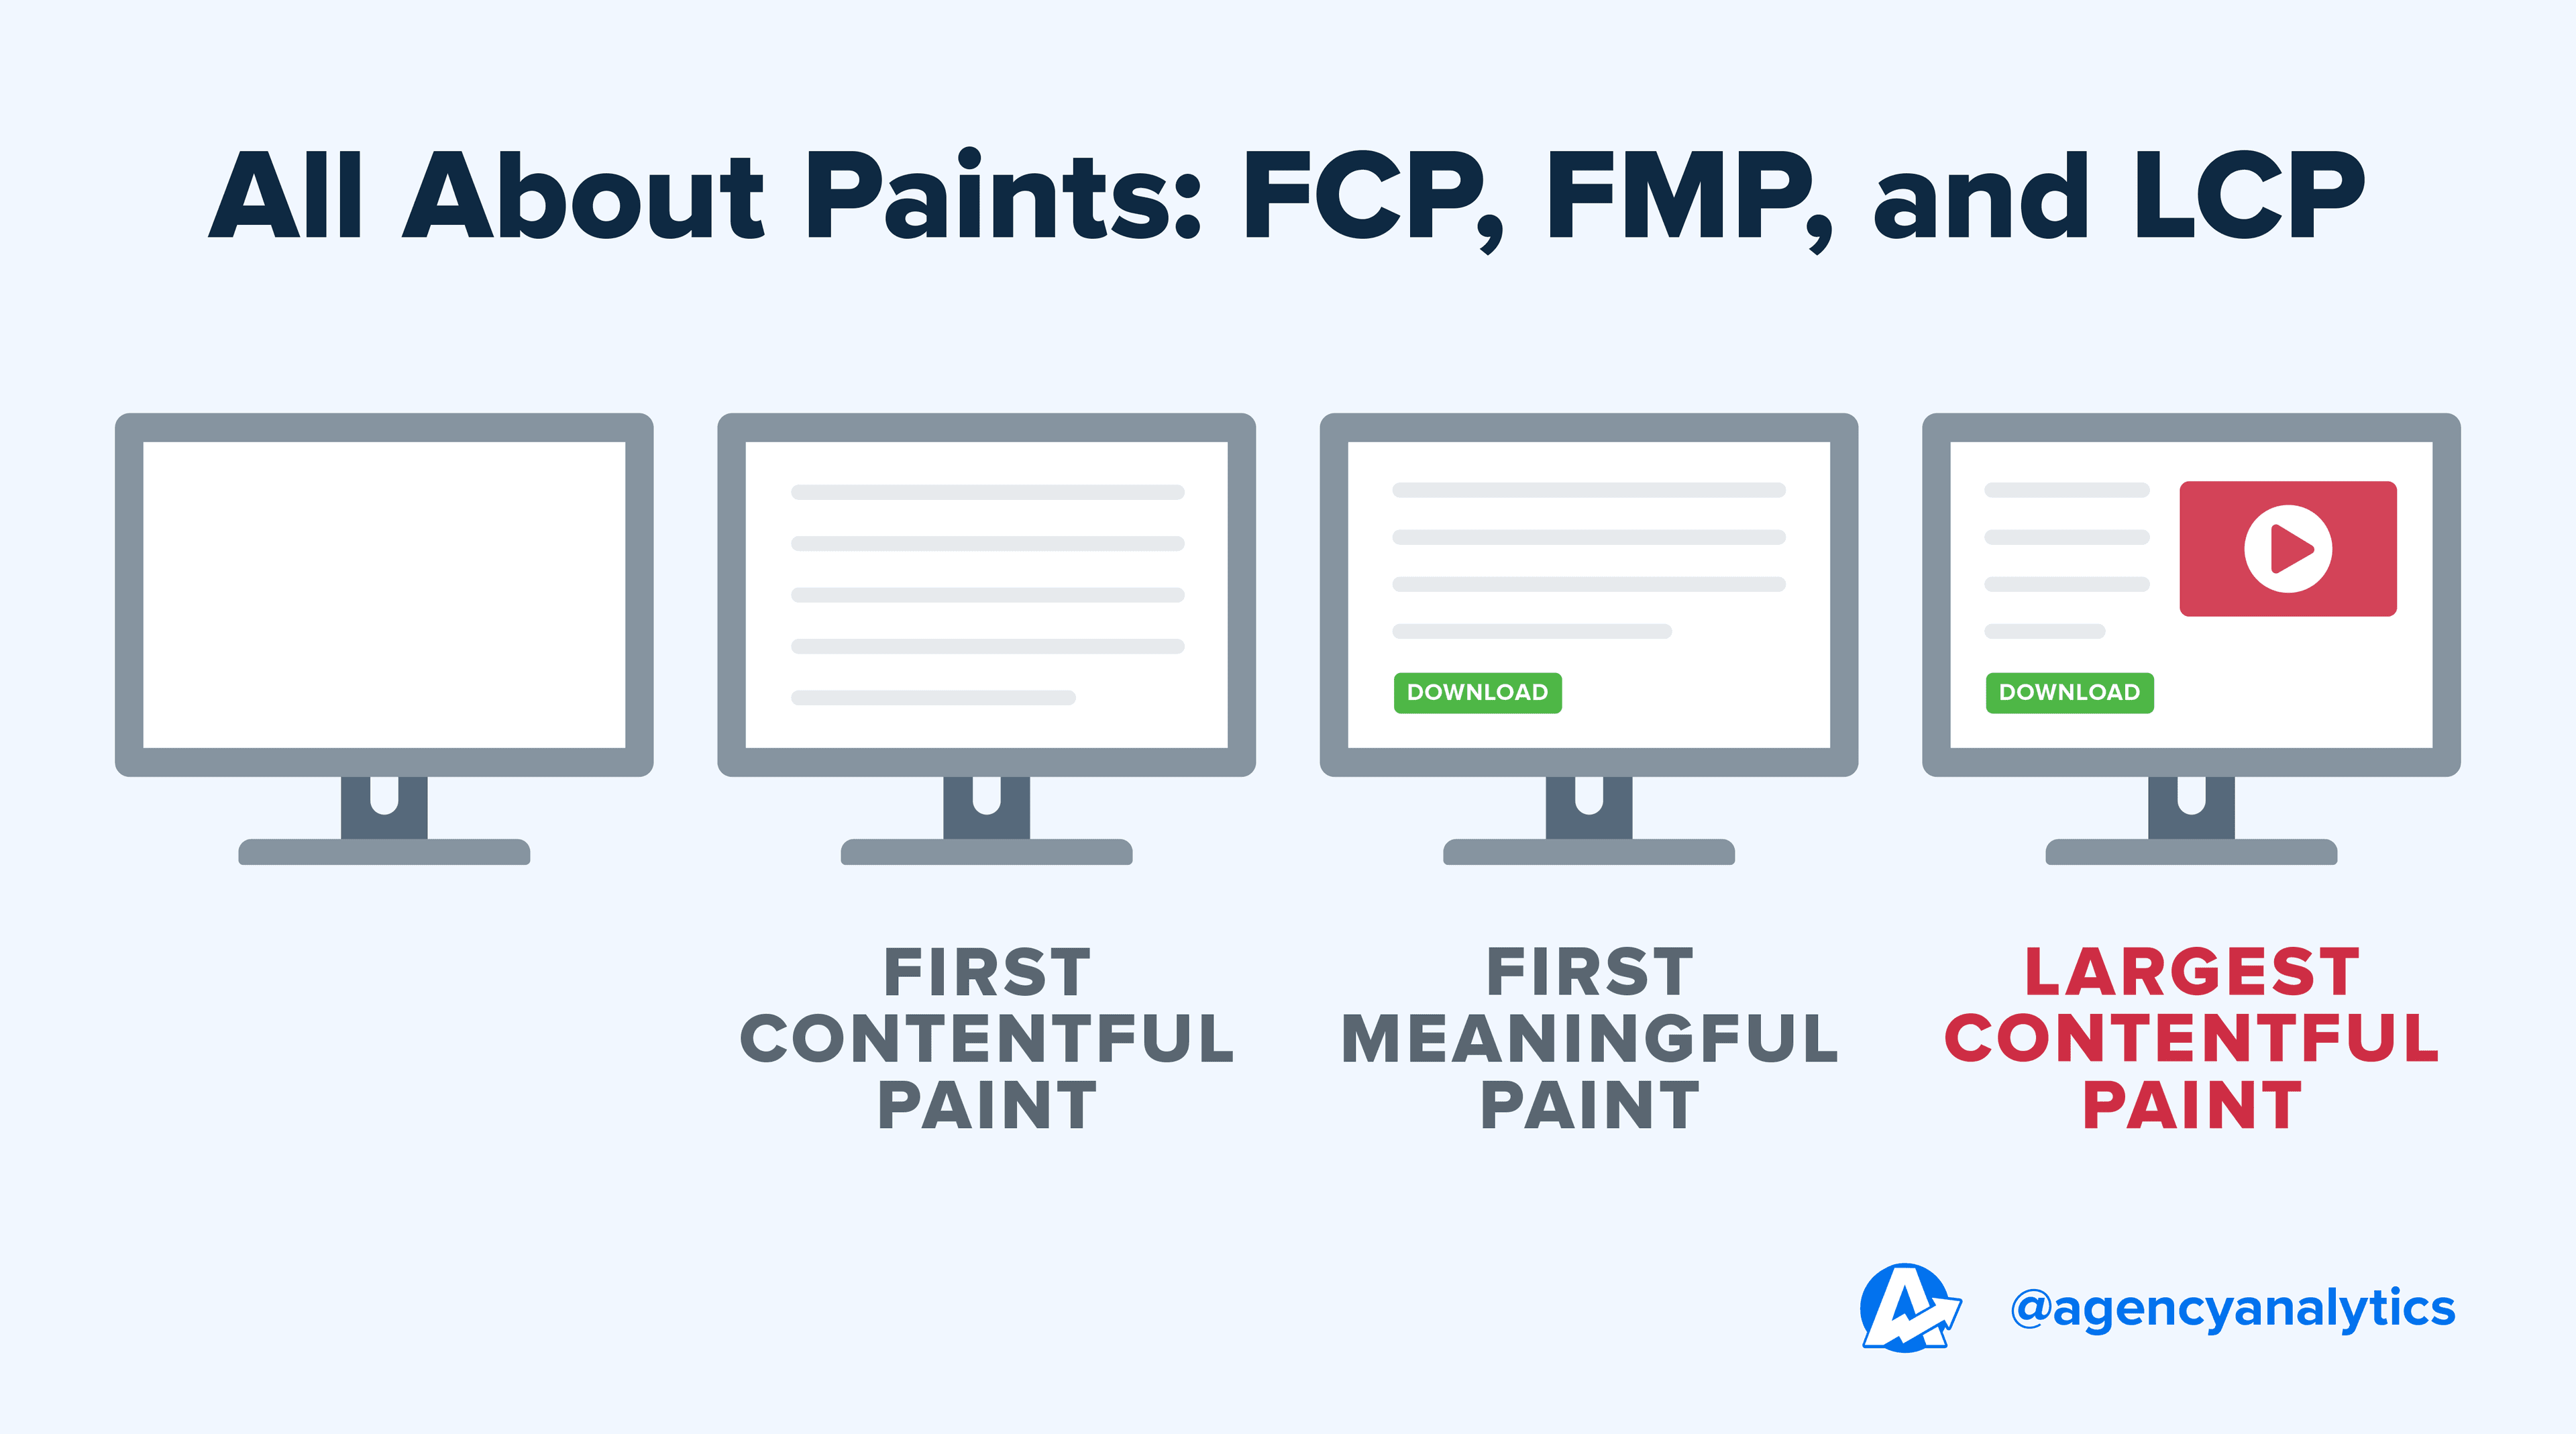 AgencyAnalytics - First Contentful Paint, First Meaningful Paint and Largest Contentful Paint